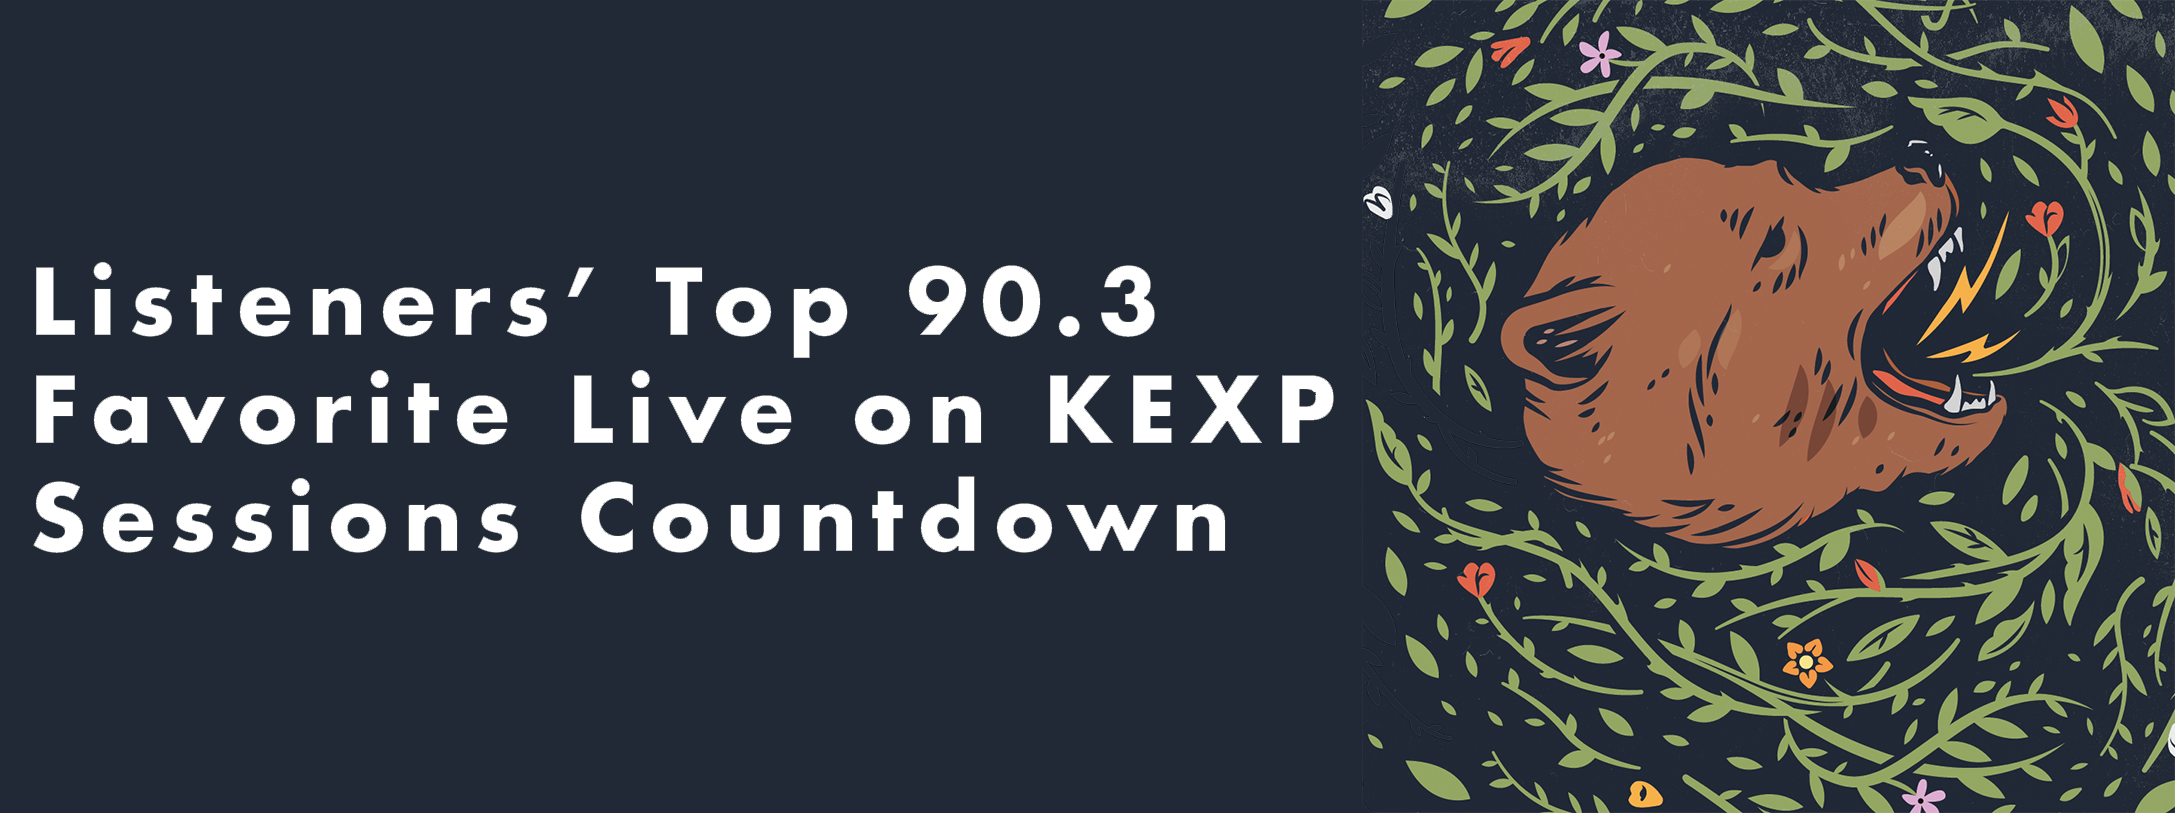 top 90 3 live on kexp countdown 02.png